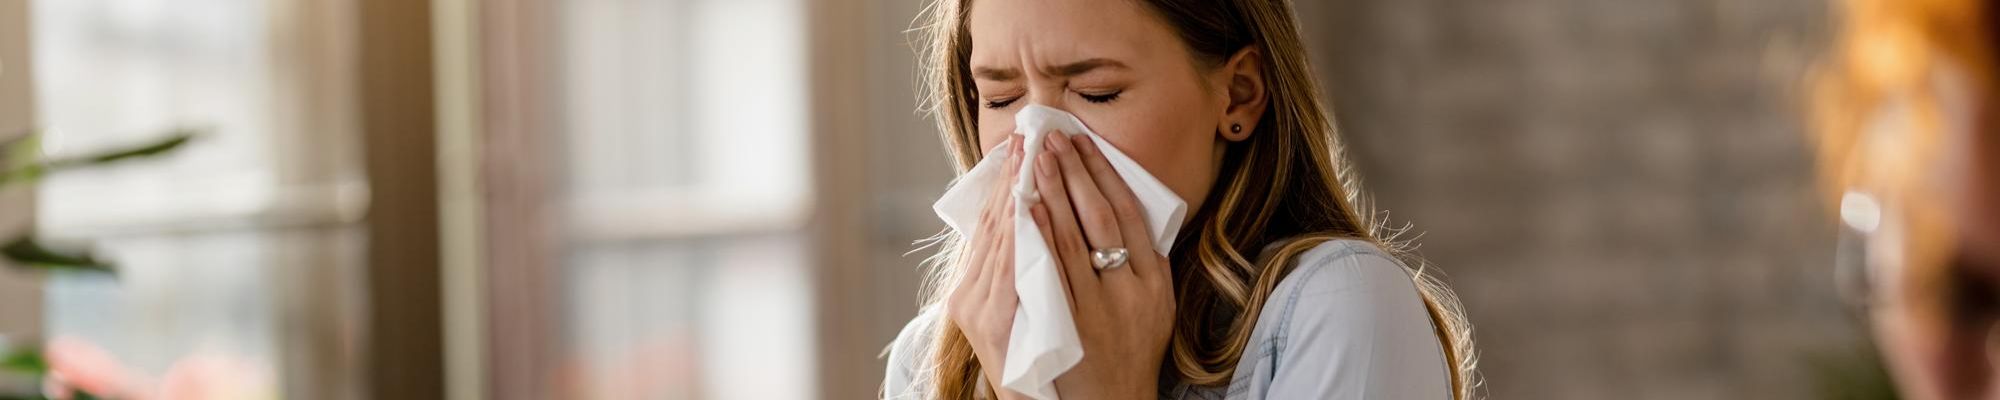 treatment of allergies